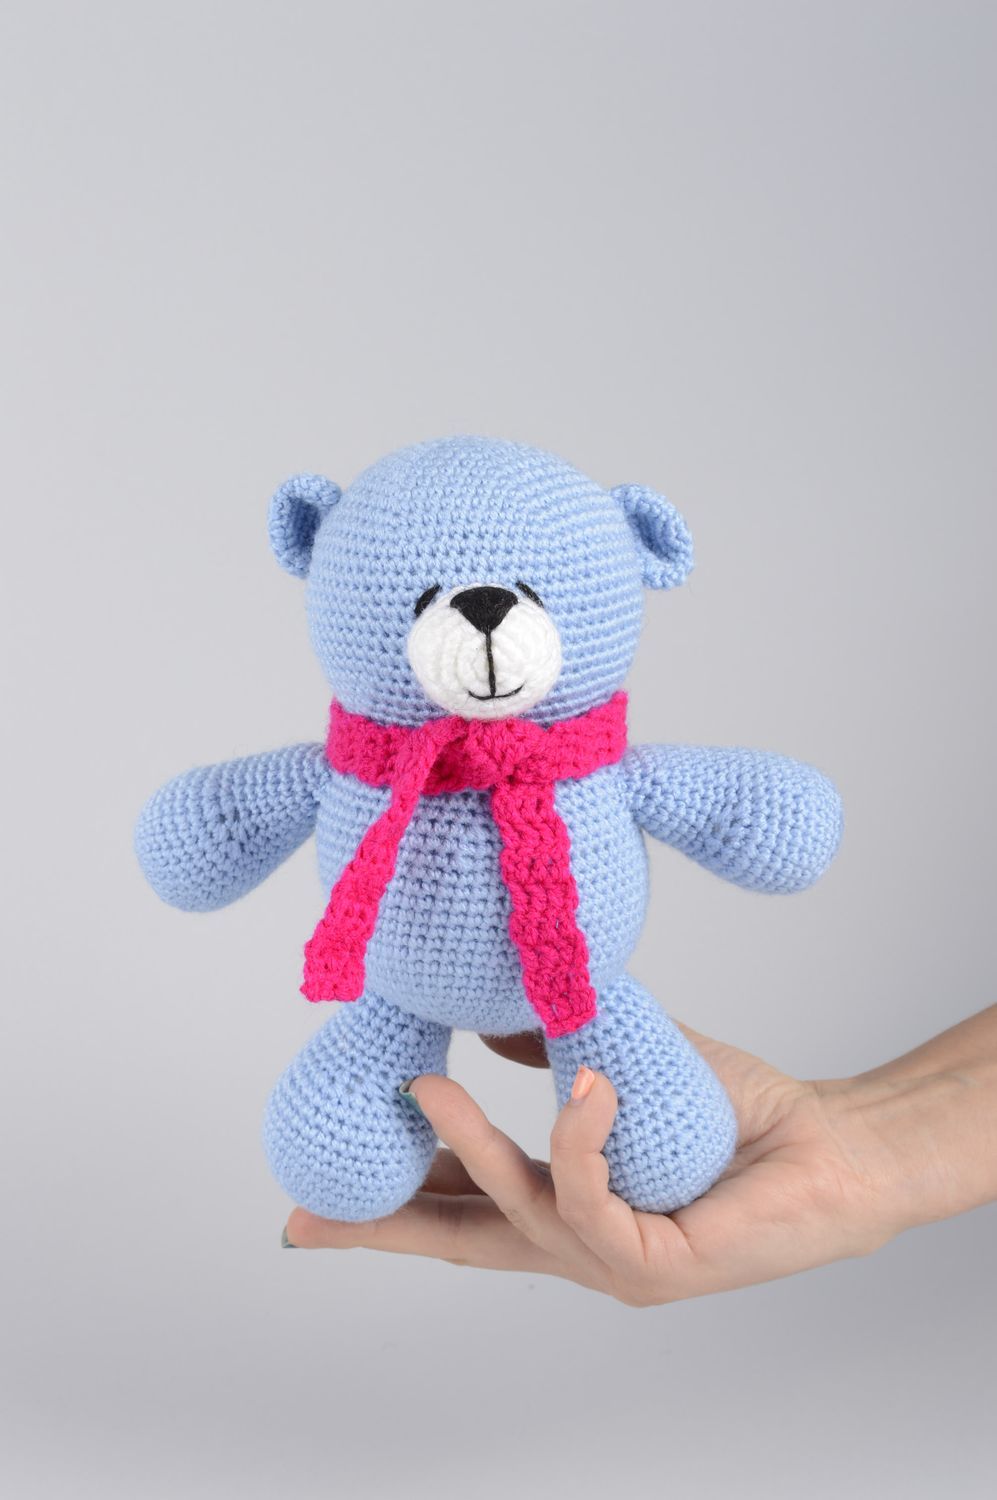 Stylish handmade soft toy cute childrens toys crochet toy for kids gift ideas photo 5